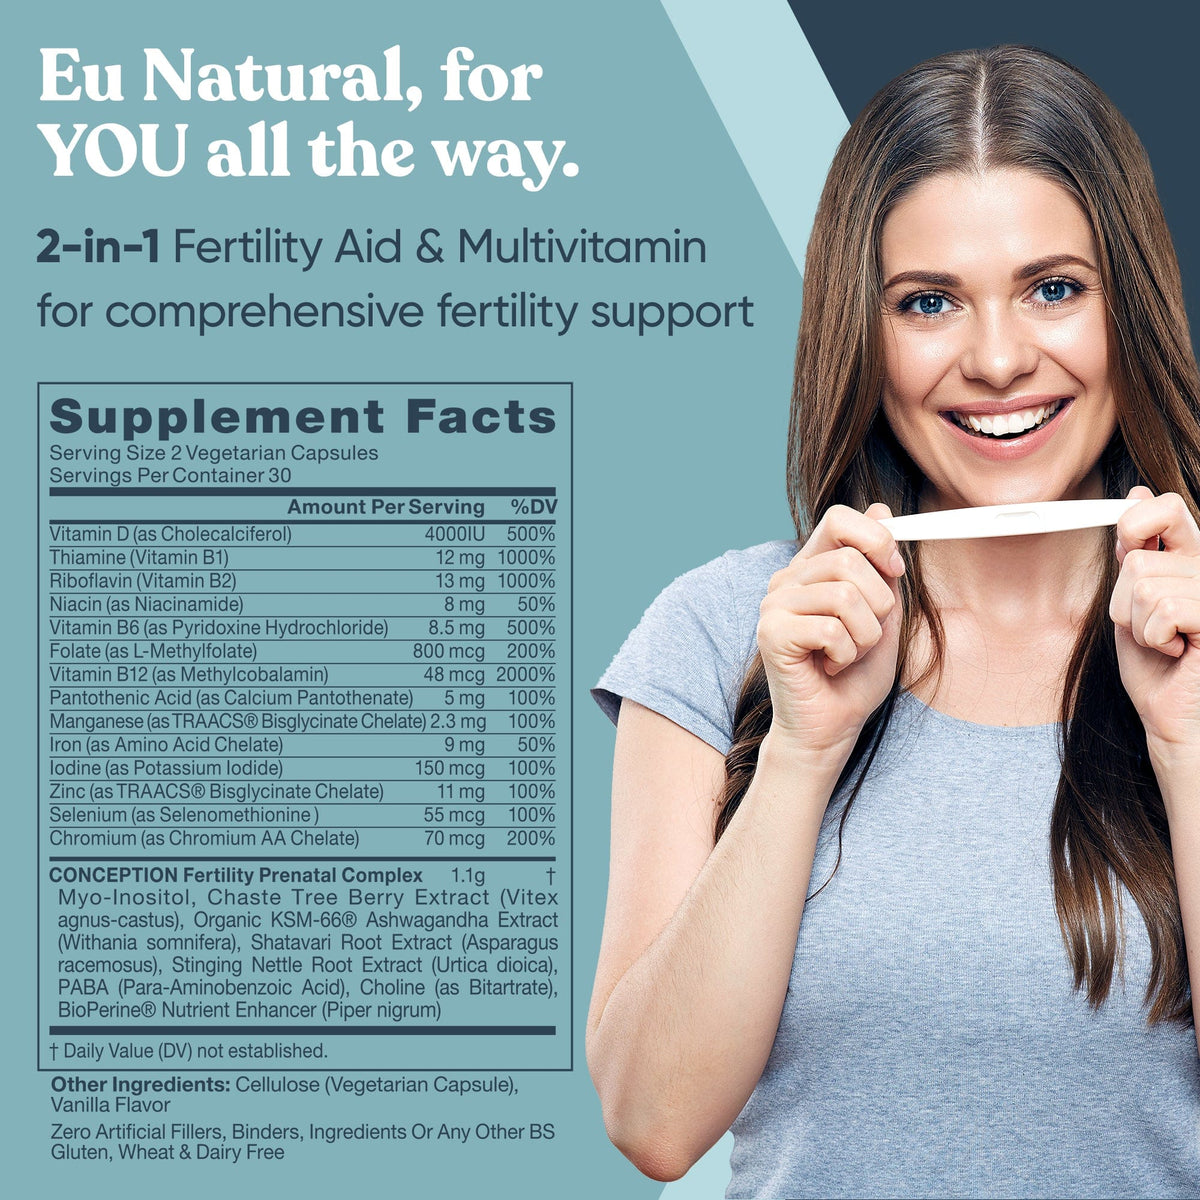 Eu Natural CONCEPTION FOR HER  Fertility Aid &amp; Multi (3 Pack)